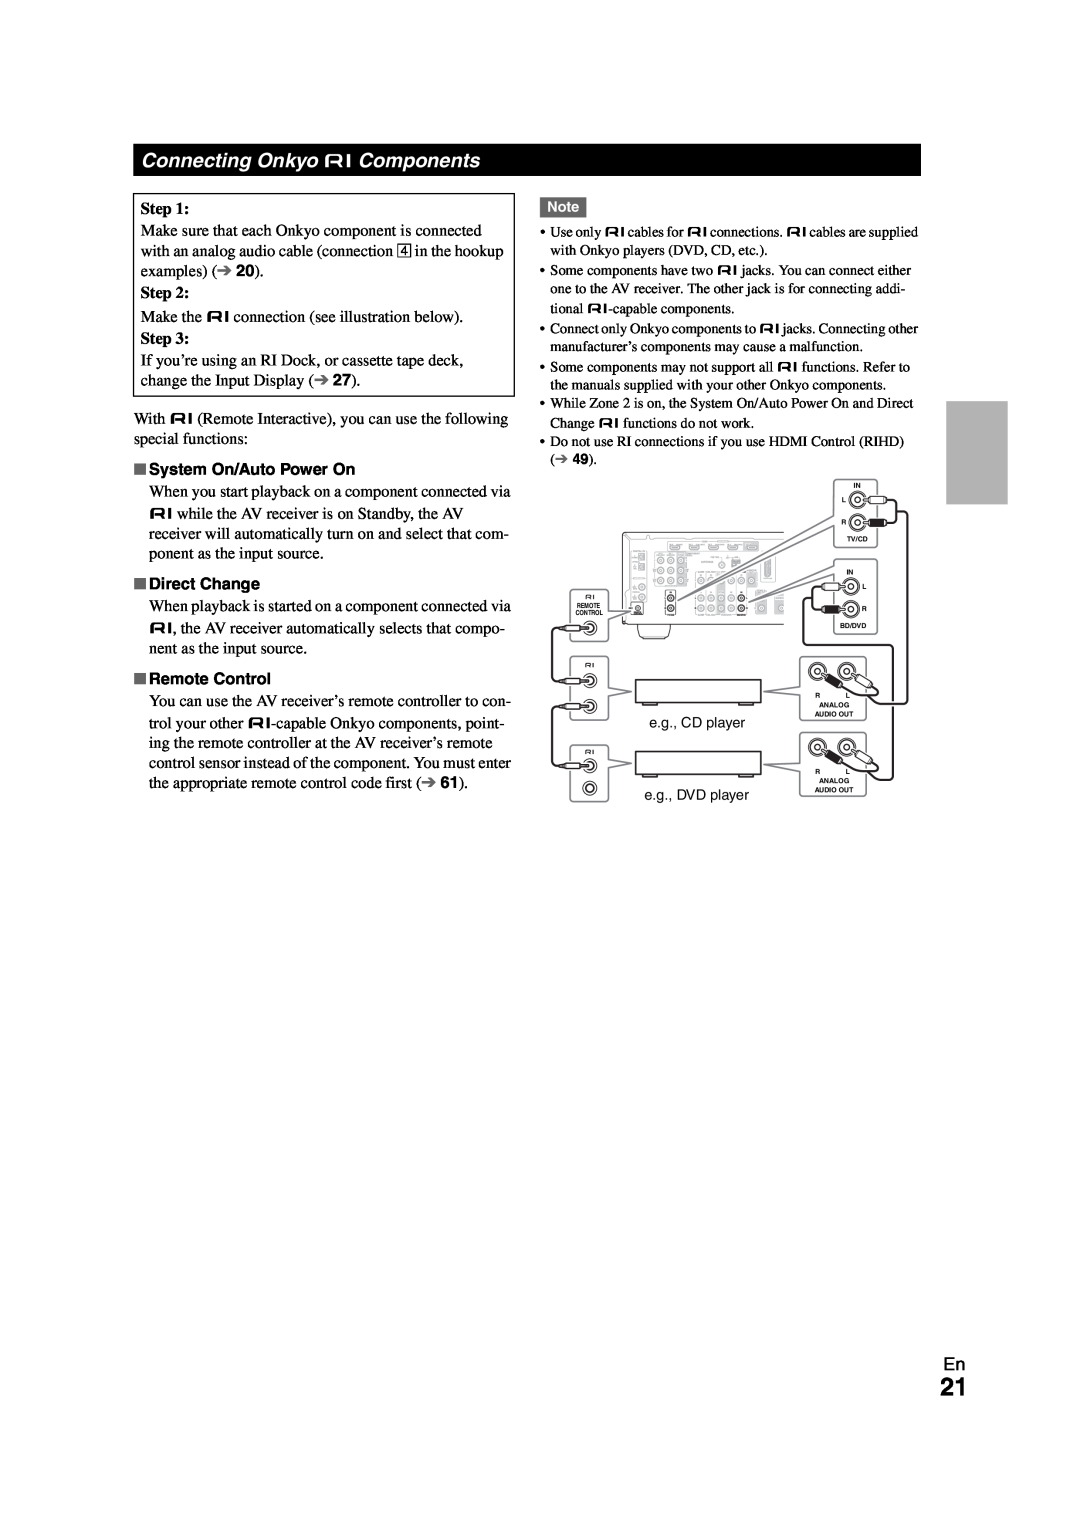 Onkyo HT-S7300 instruction manual Connecting Onkyo uComponents, System On/Auto Power On, Direct Change, Remote Control 